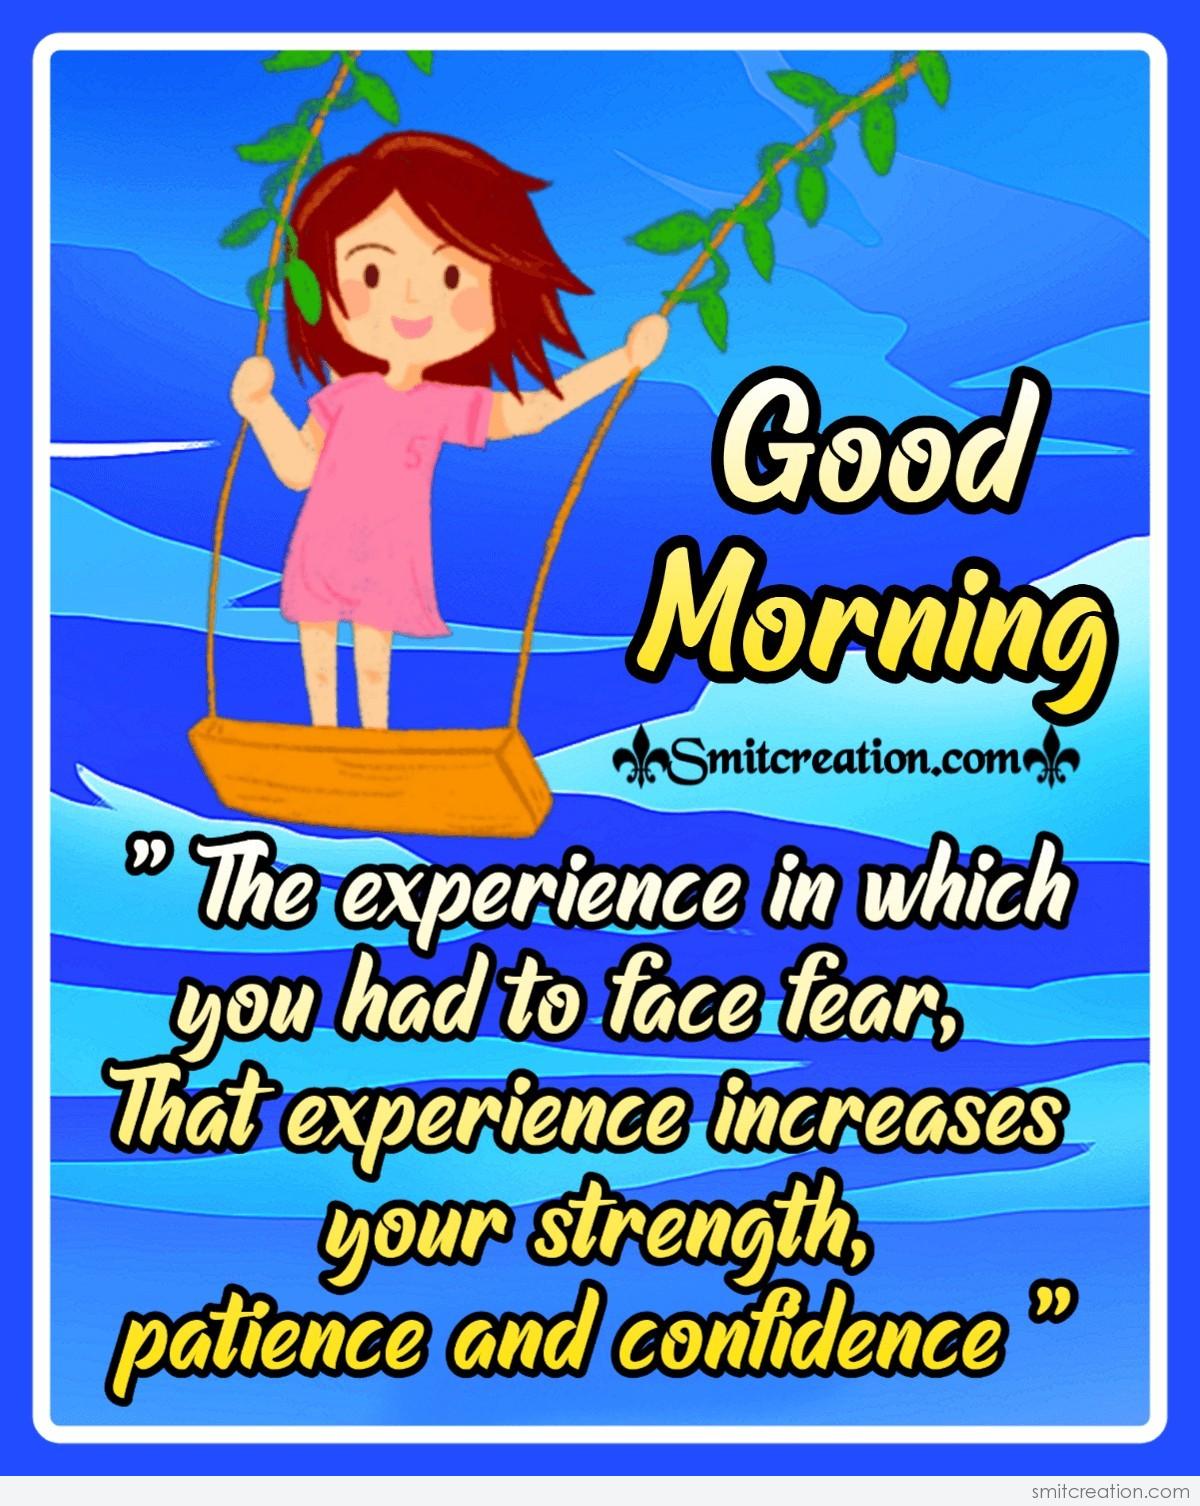 Good Morning Quote On Experience - SmitCreation.com